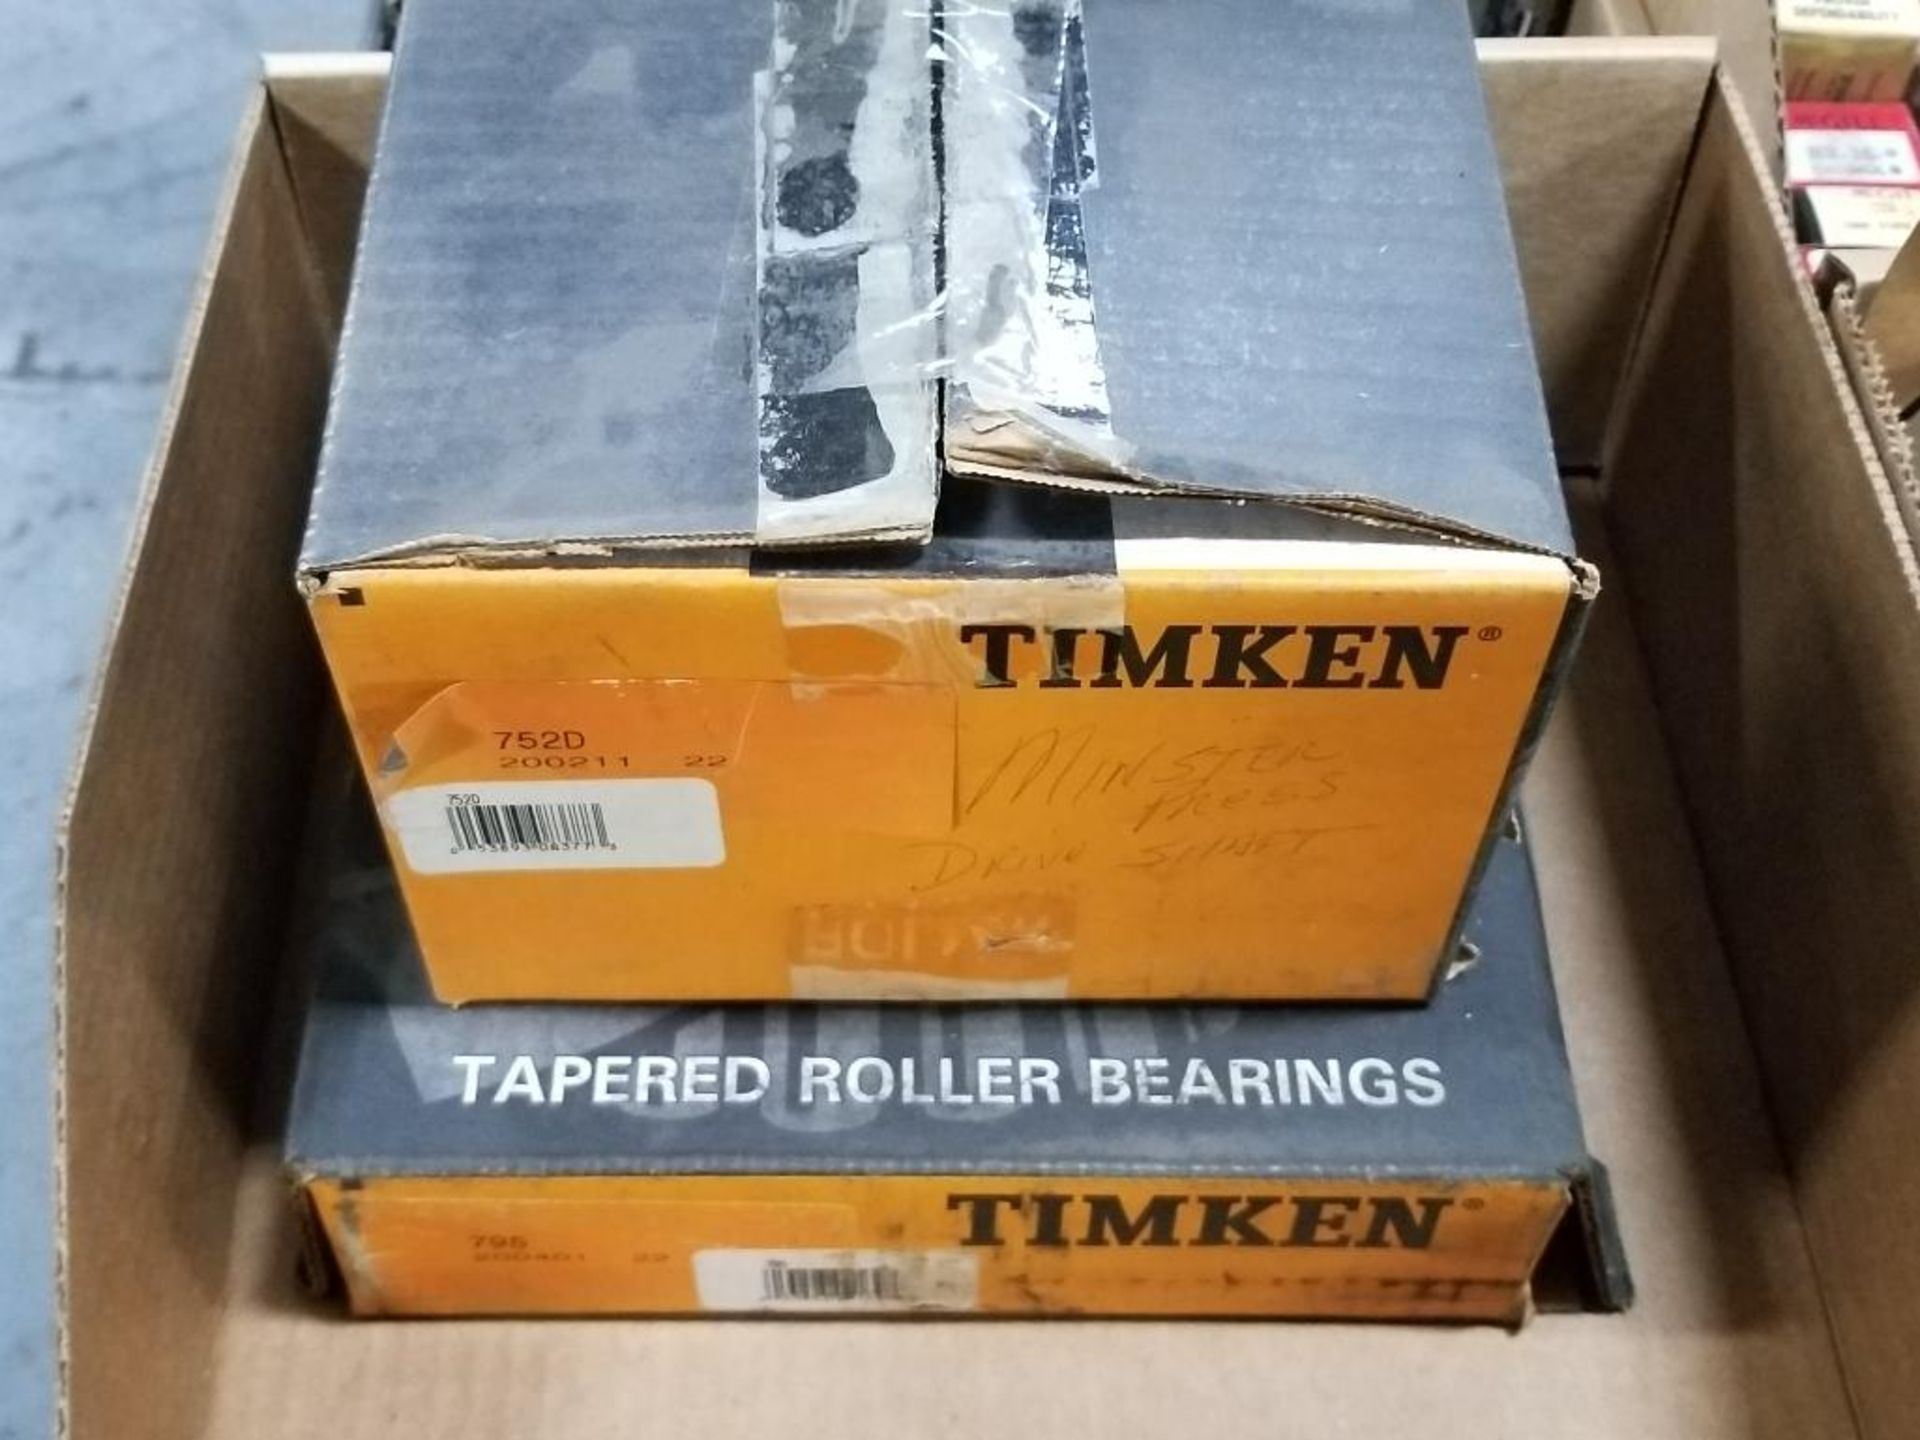 Qty 2 - Timken Bearings. Part number 752D and 795.